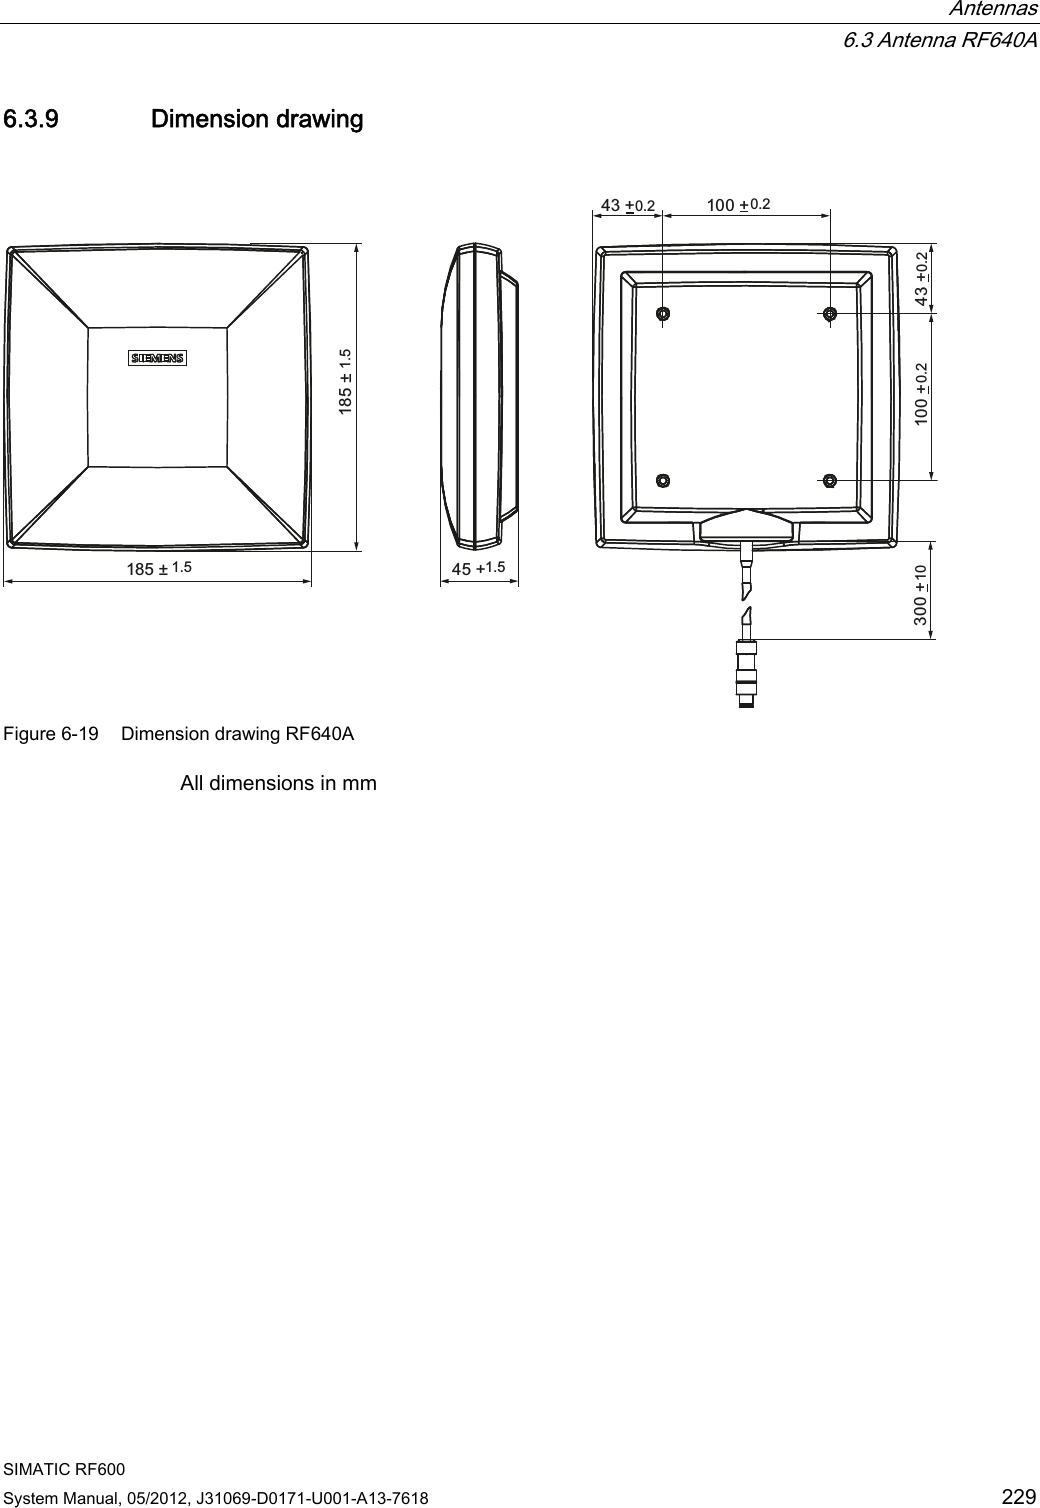  Antennas  6.3 Antenna RF640A SIMATIC RF600 System Manual, 05/2012, J31069-D0171-U001-A13-7618  229 6.3.9 Dimension drawing s s   Figure 6-19  Dimension drawing RF640A All dimensions in mm 